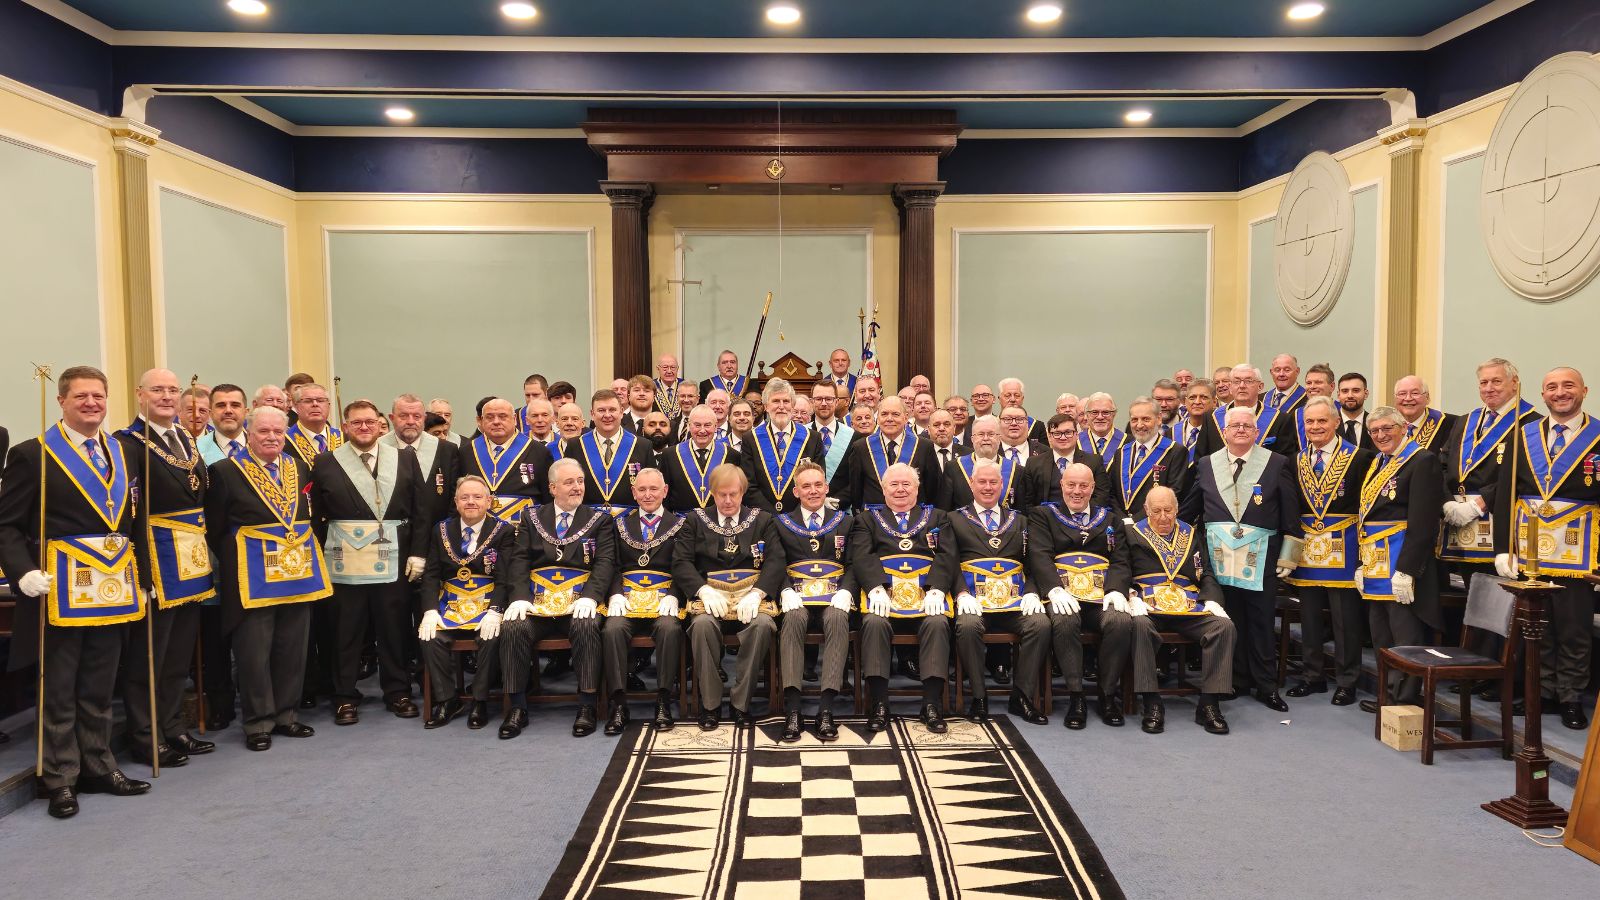 Freemasons of the University of Manchester Lodge in their regalia